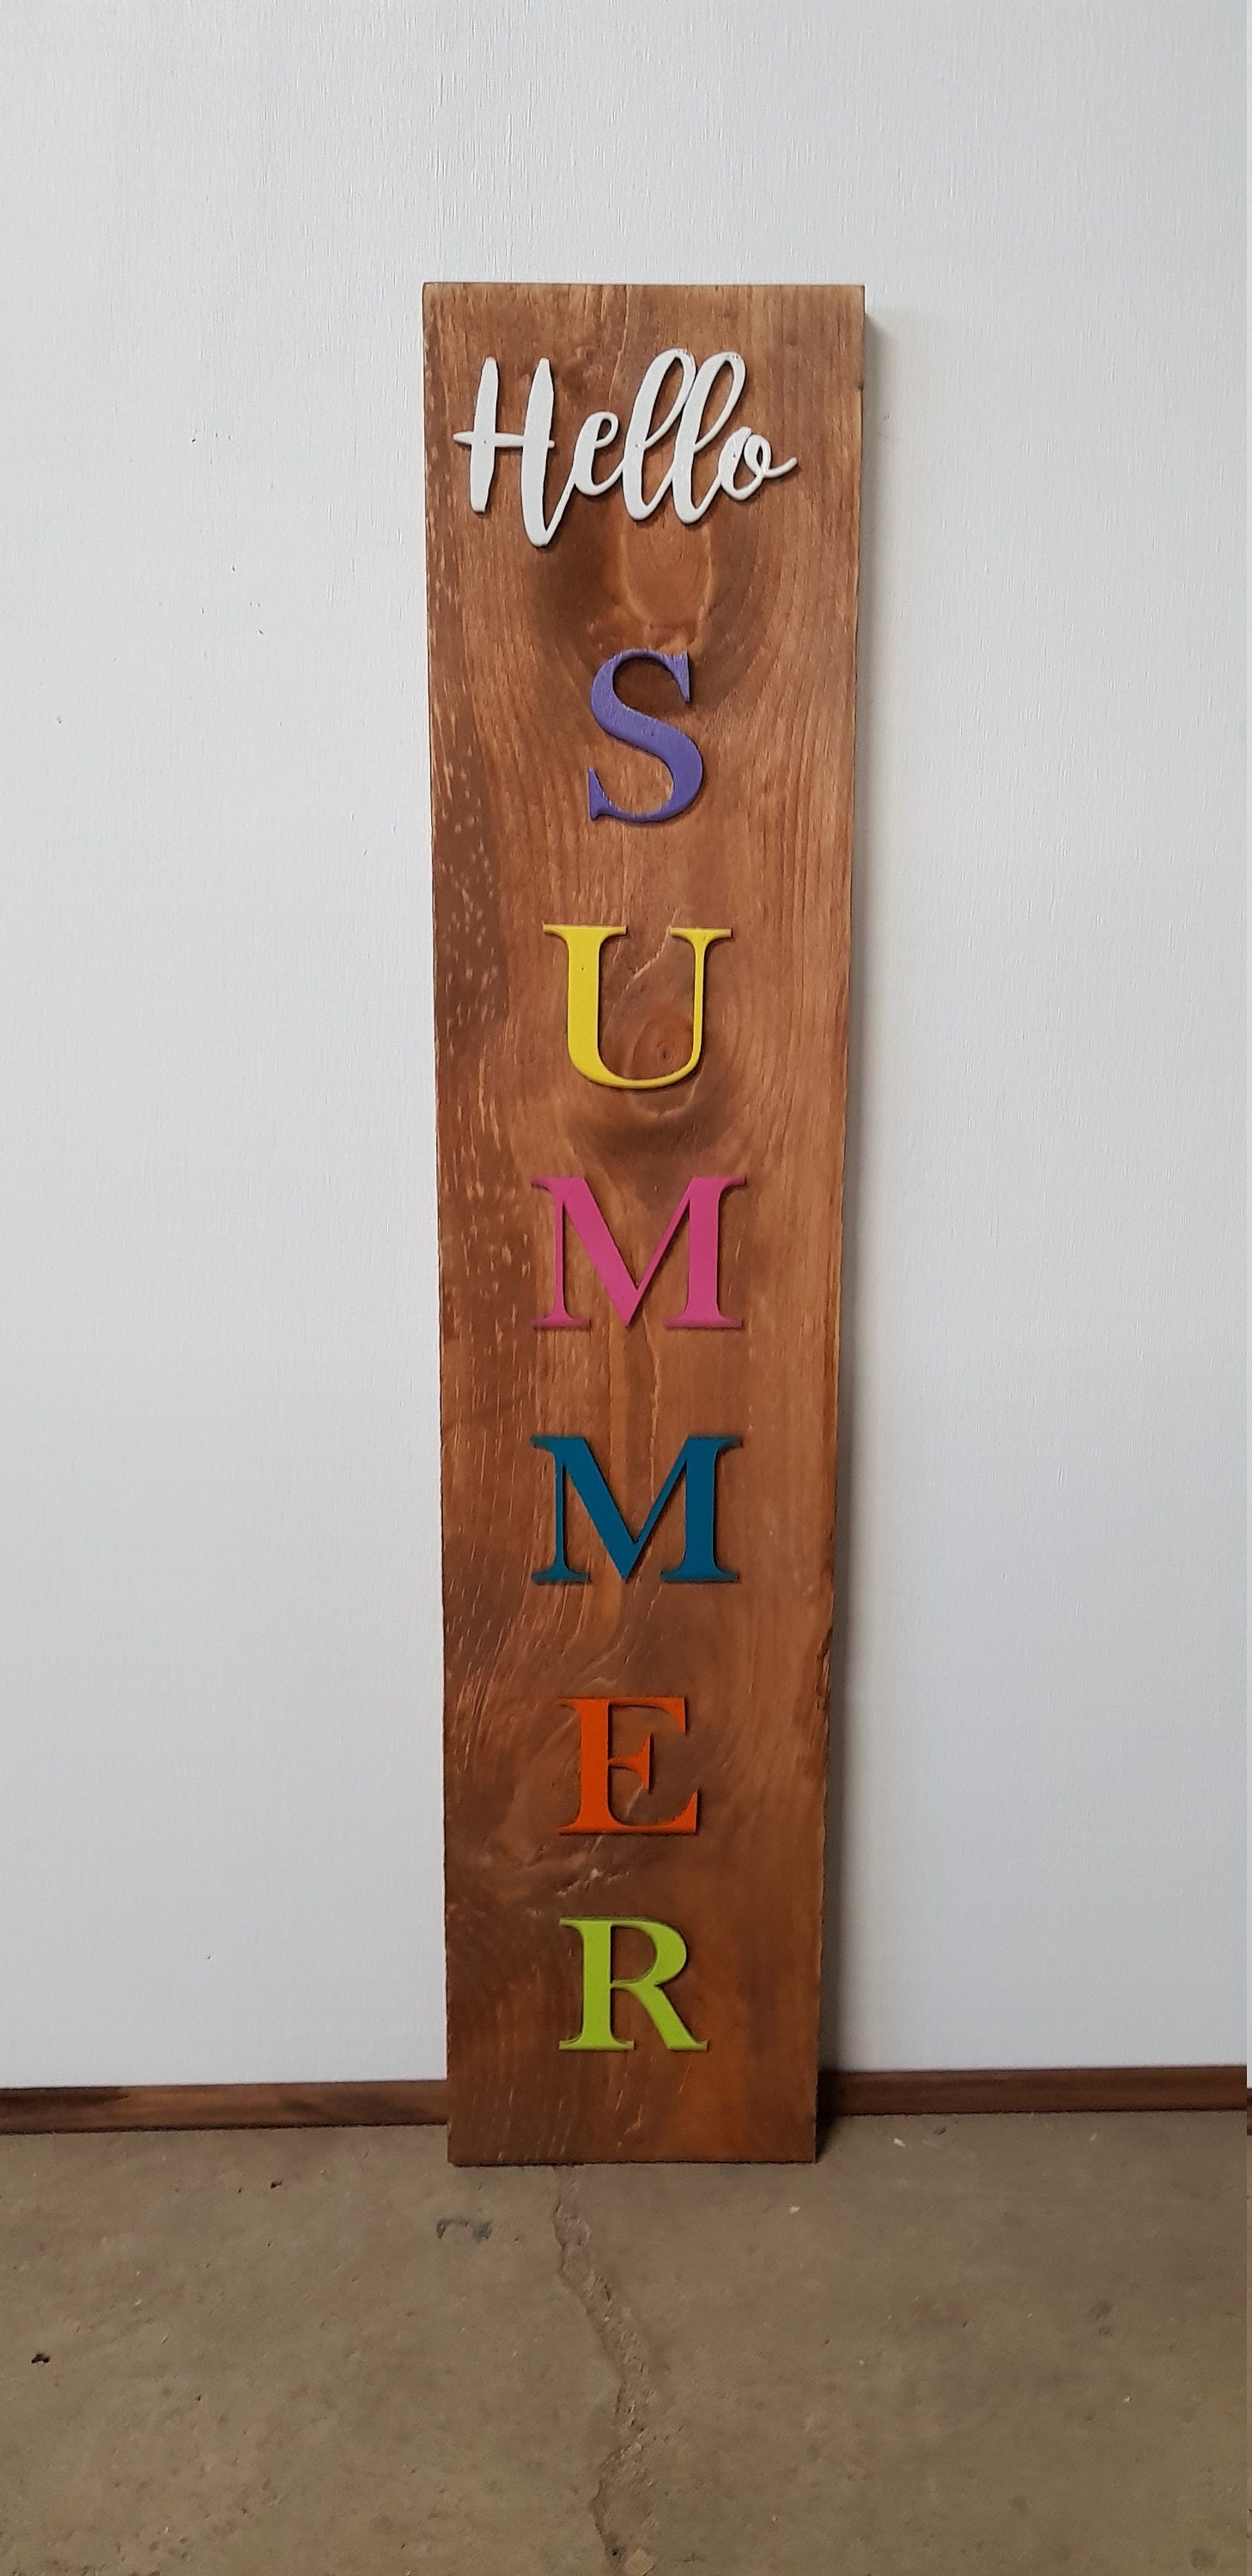 Hello Summer, Porch Sign, Raised Lettering, Decor, Over-sized Rustic, Wood, Laser Cut Out, Extra Large, Sign